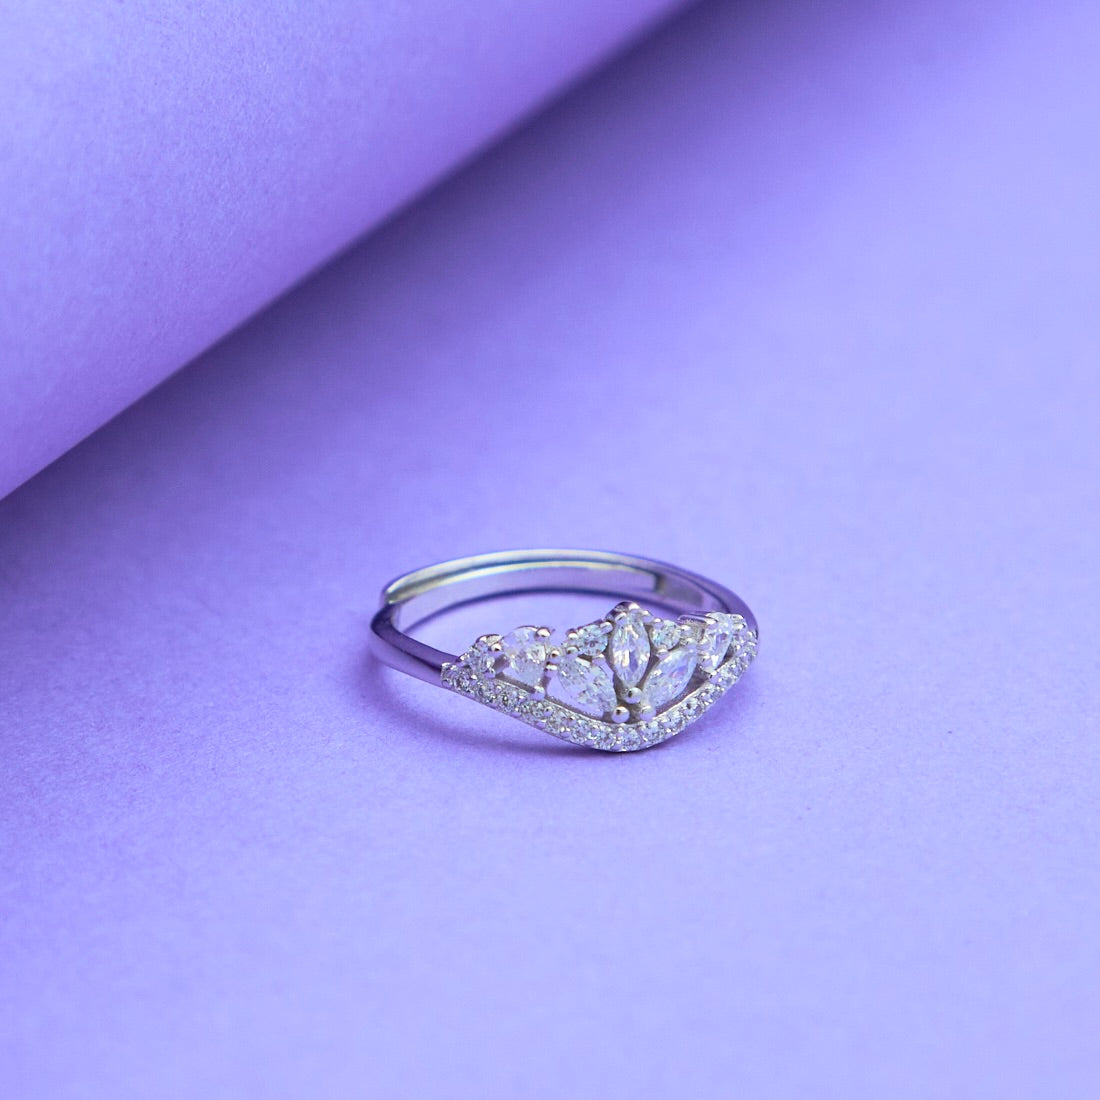 Silver Crown Shaped Adjustable Ring